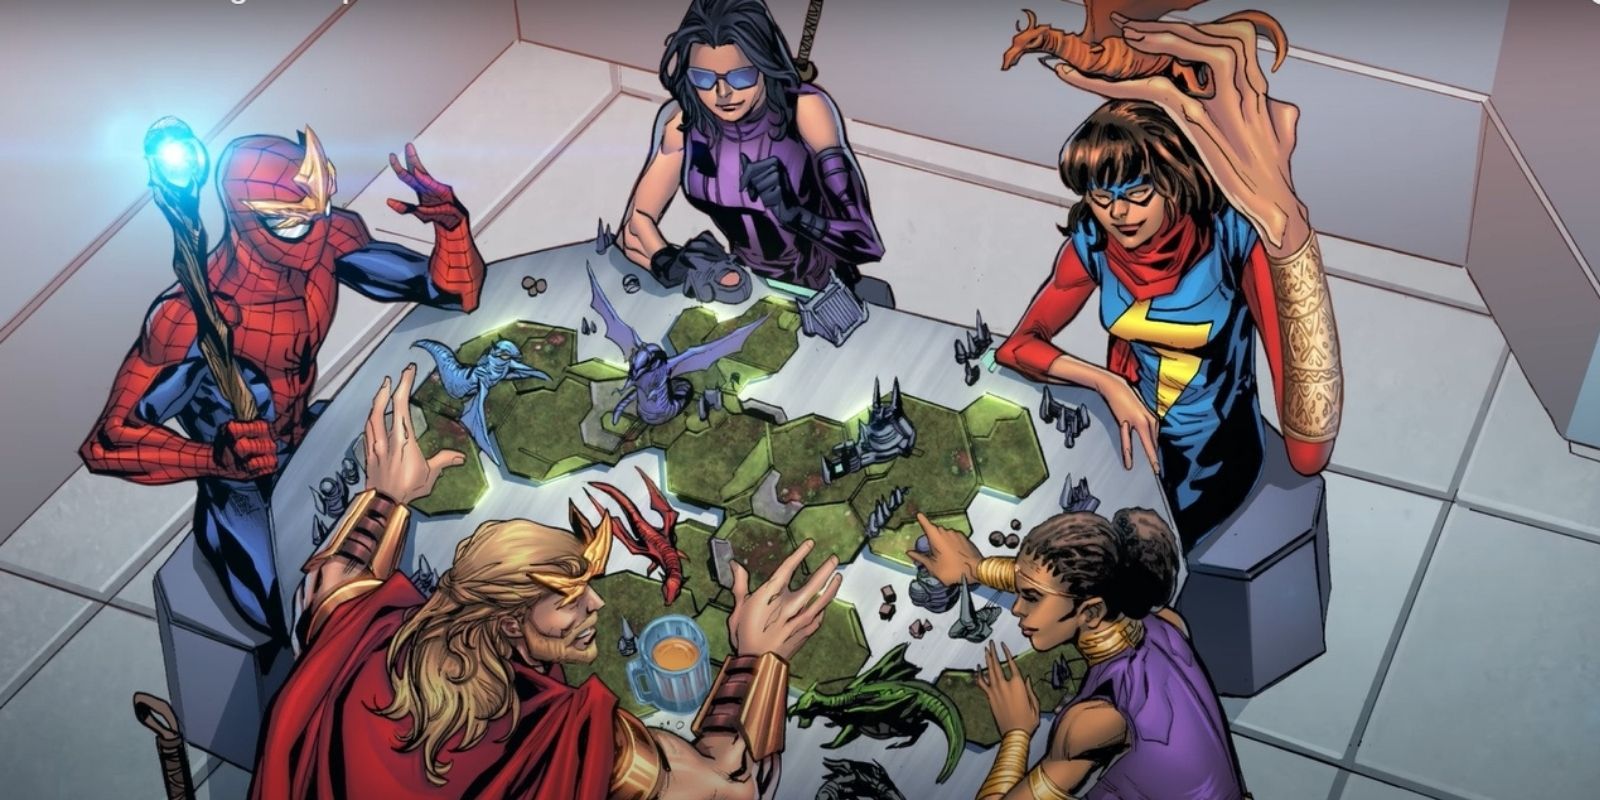 Spider-Man, dressed as a wizards, plays Dungeons & Dragons with Kate Bishop, Kamala Khan, Thor and Shuri